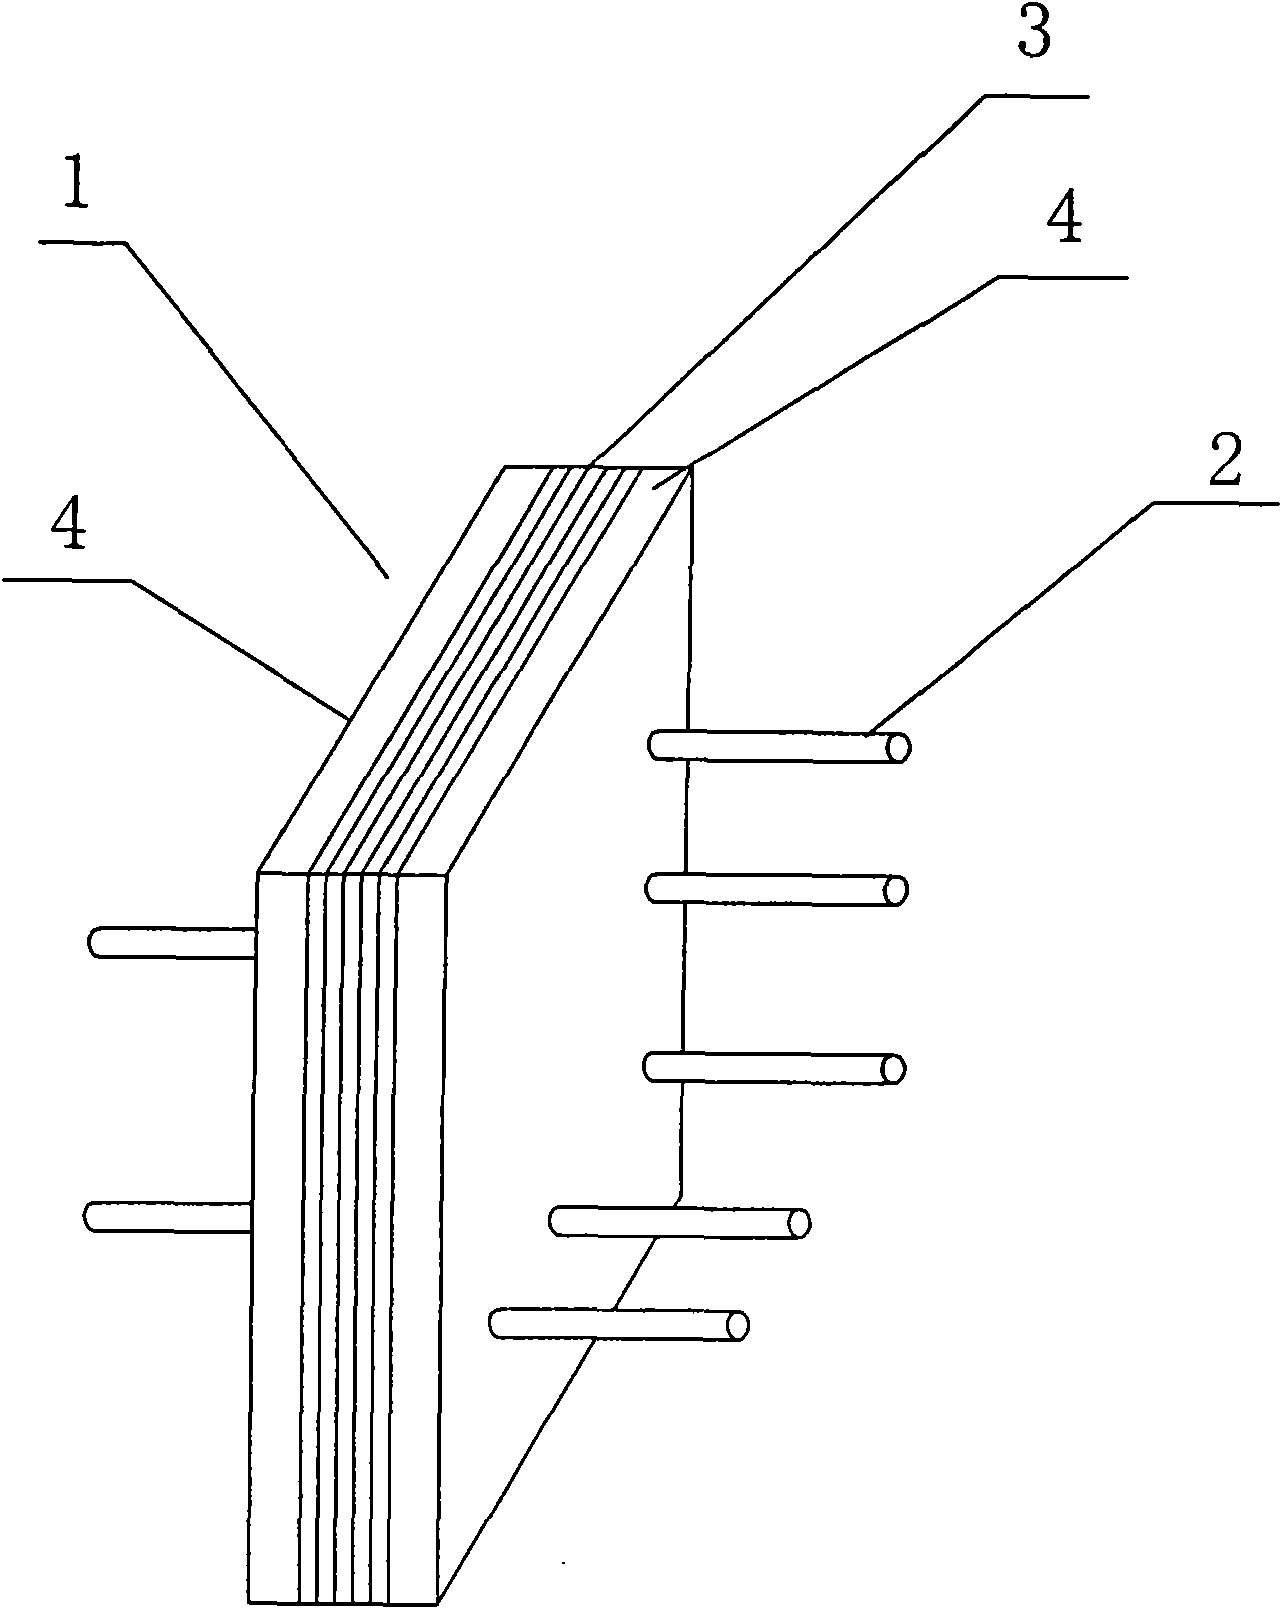 Method for processing integrated stainless steel micro-fluid reactors